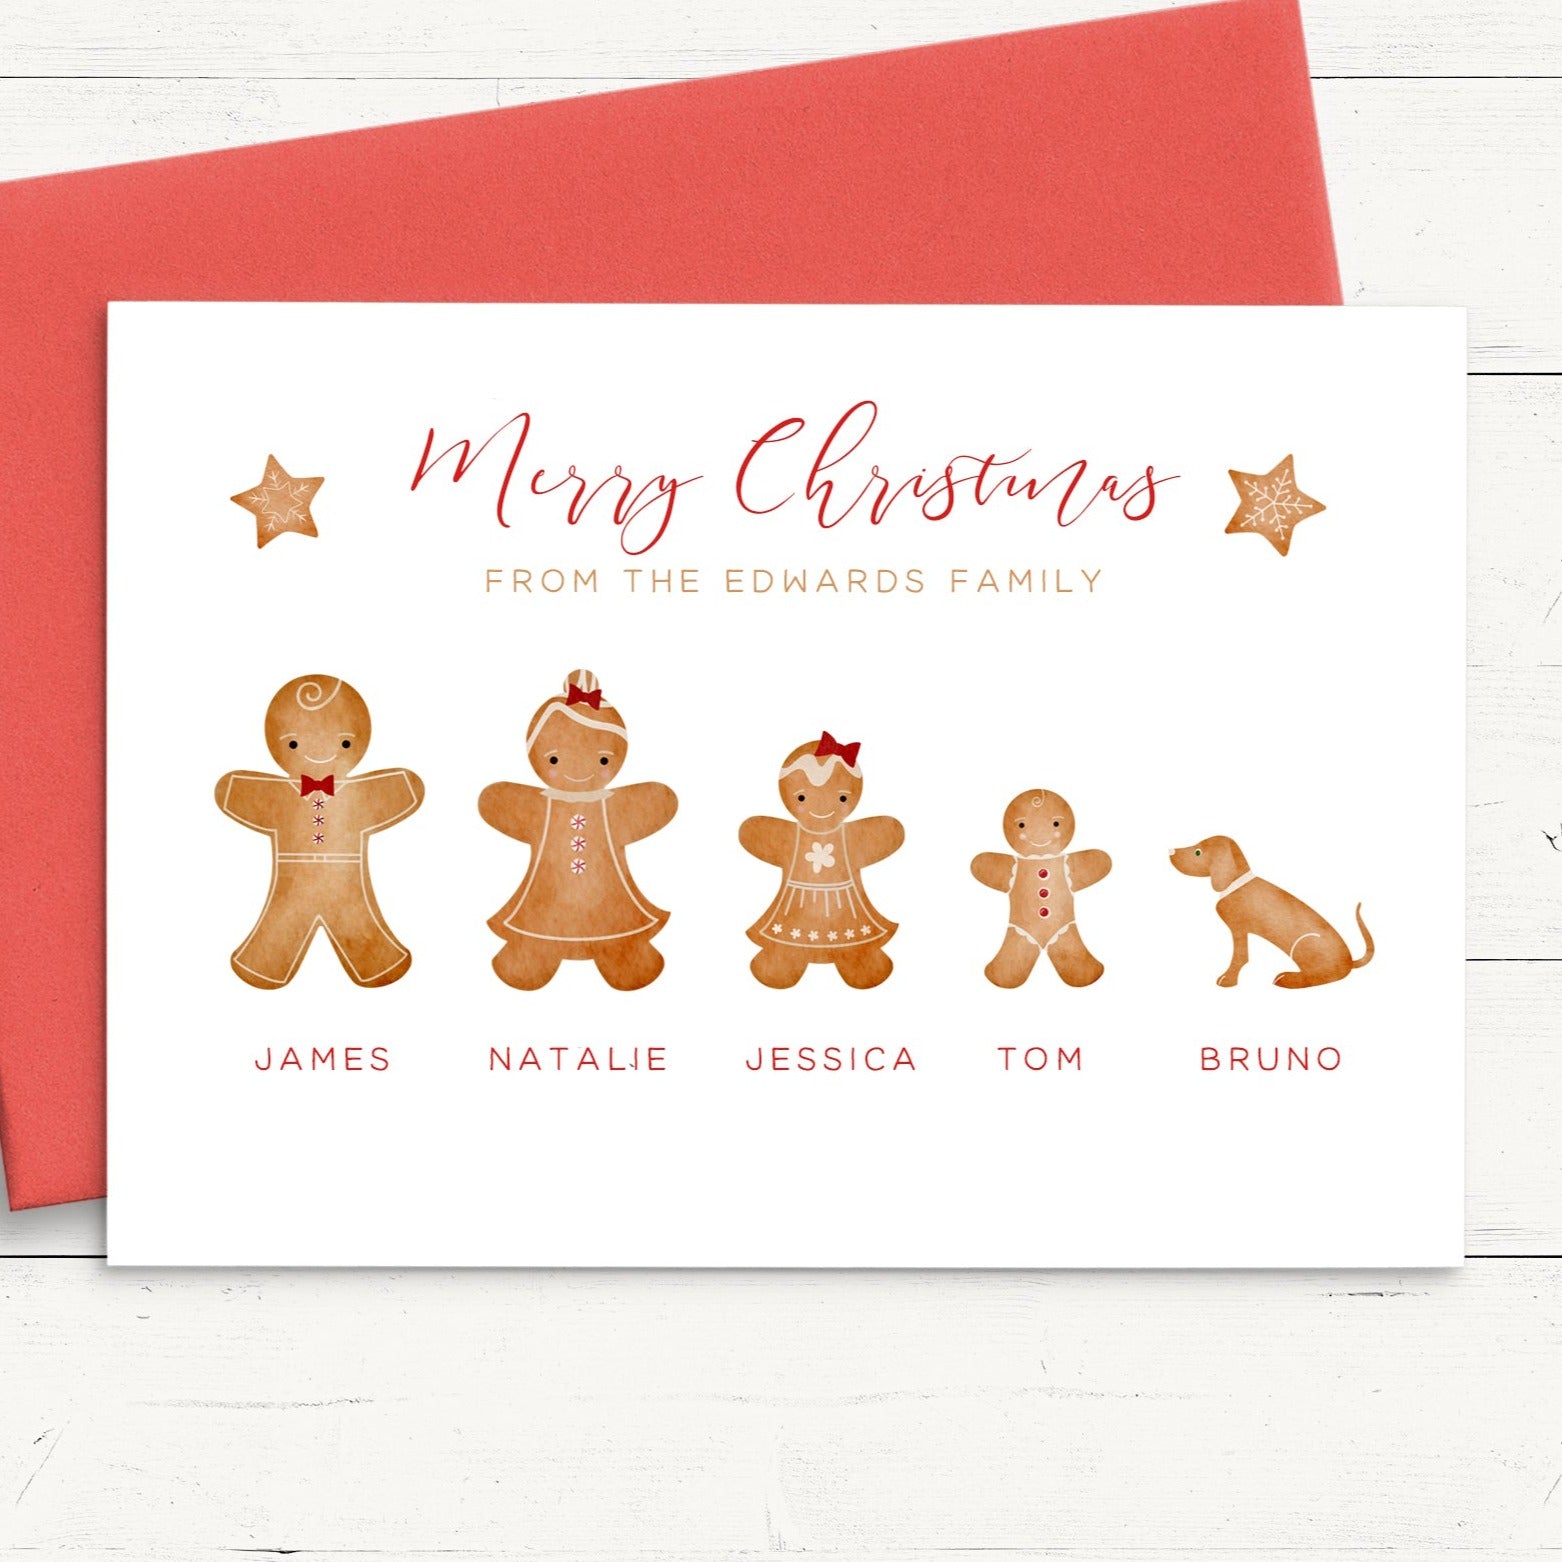 gingerbread people family christmas cards personalised red envelopes matte white cardstock smooth